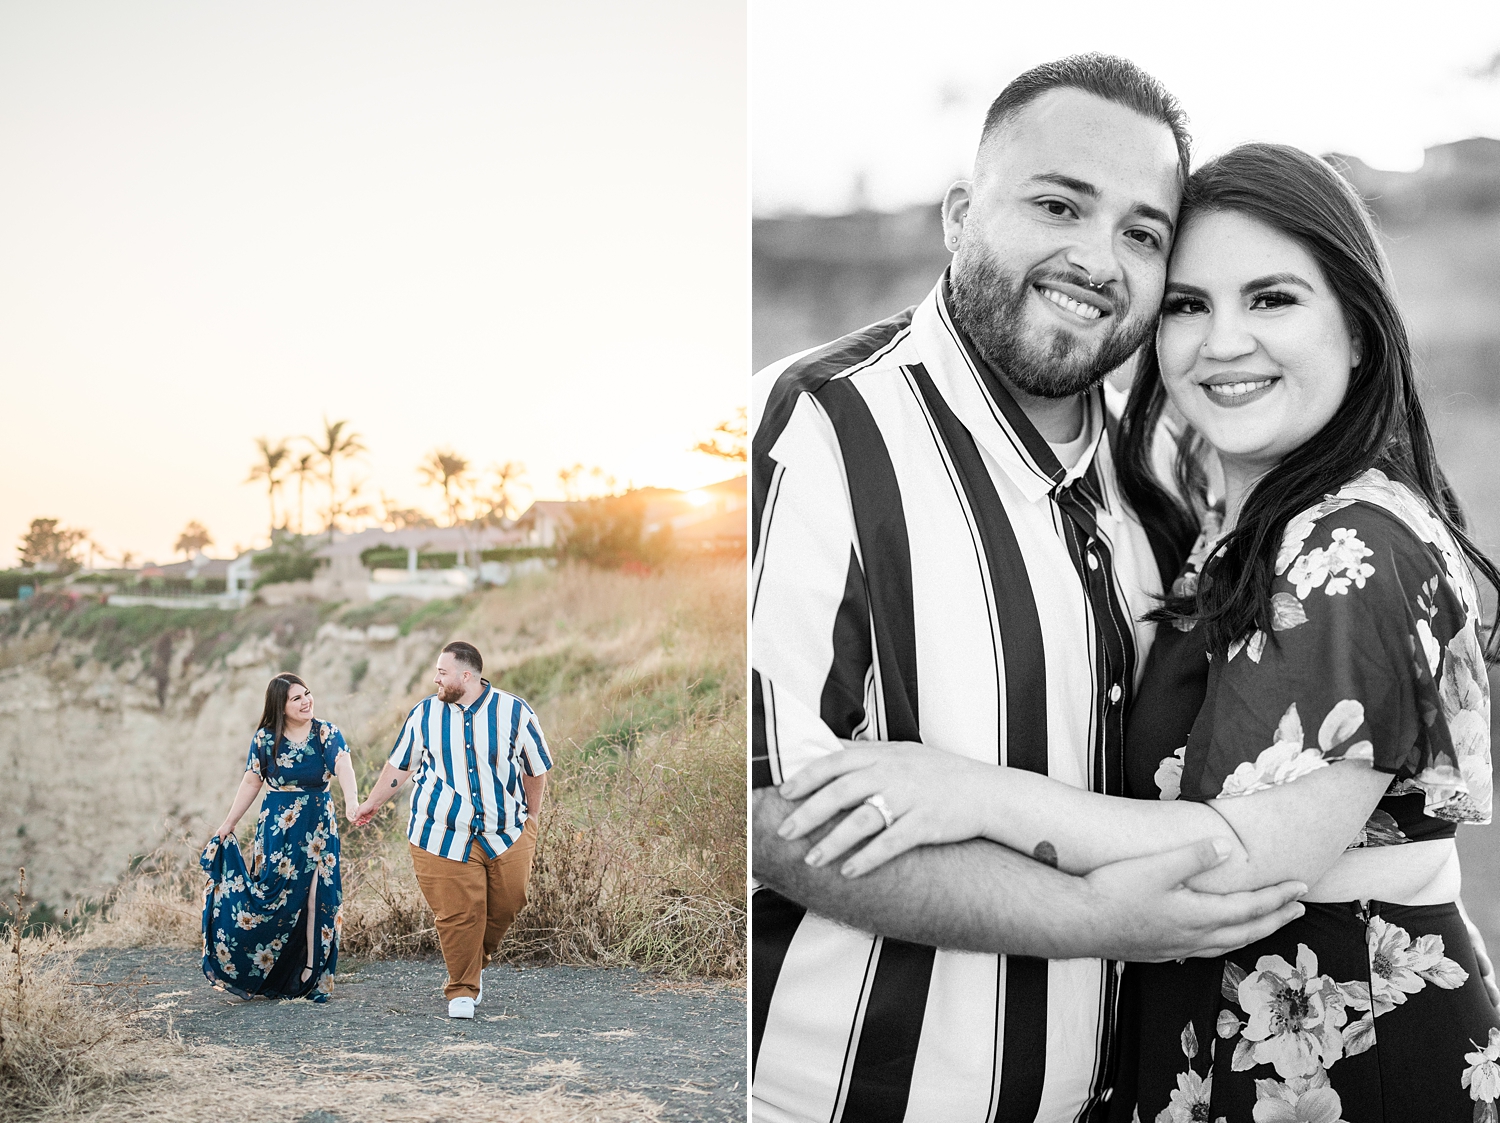 Beach Cliffs Engagement Session at Sunset | Nataly Hernandez Photography | Edwin and Susana-84.jpg